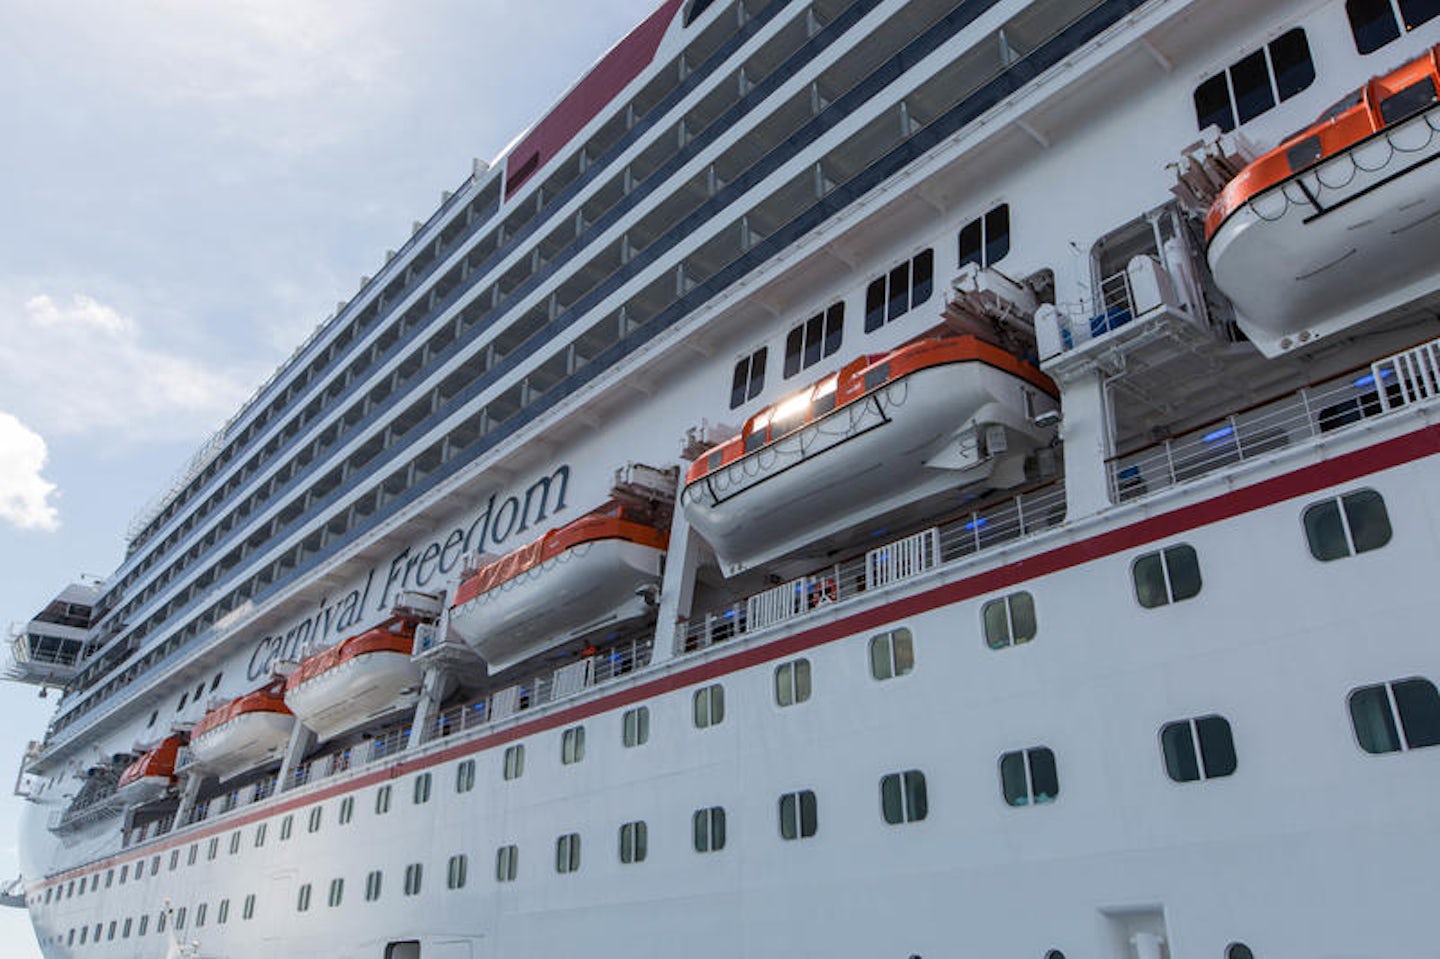 Exterior on Carnival Freedom Cruise Ship Cruise Critic